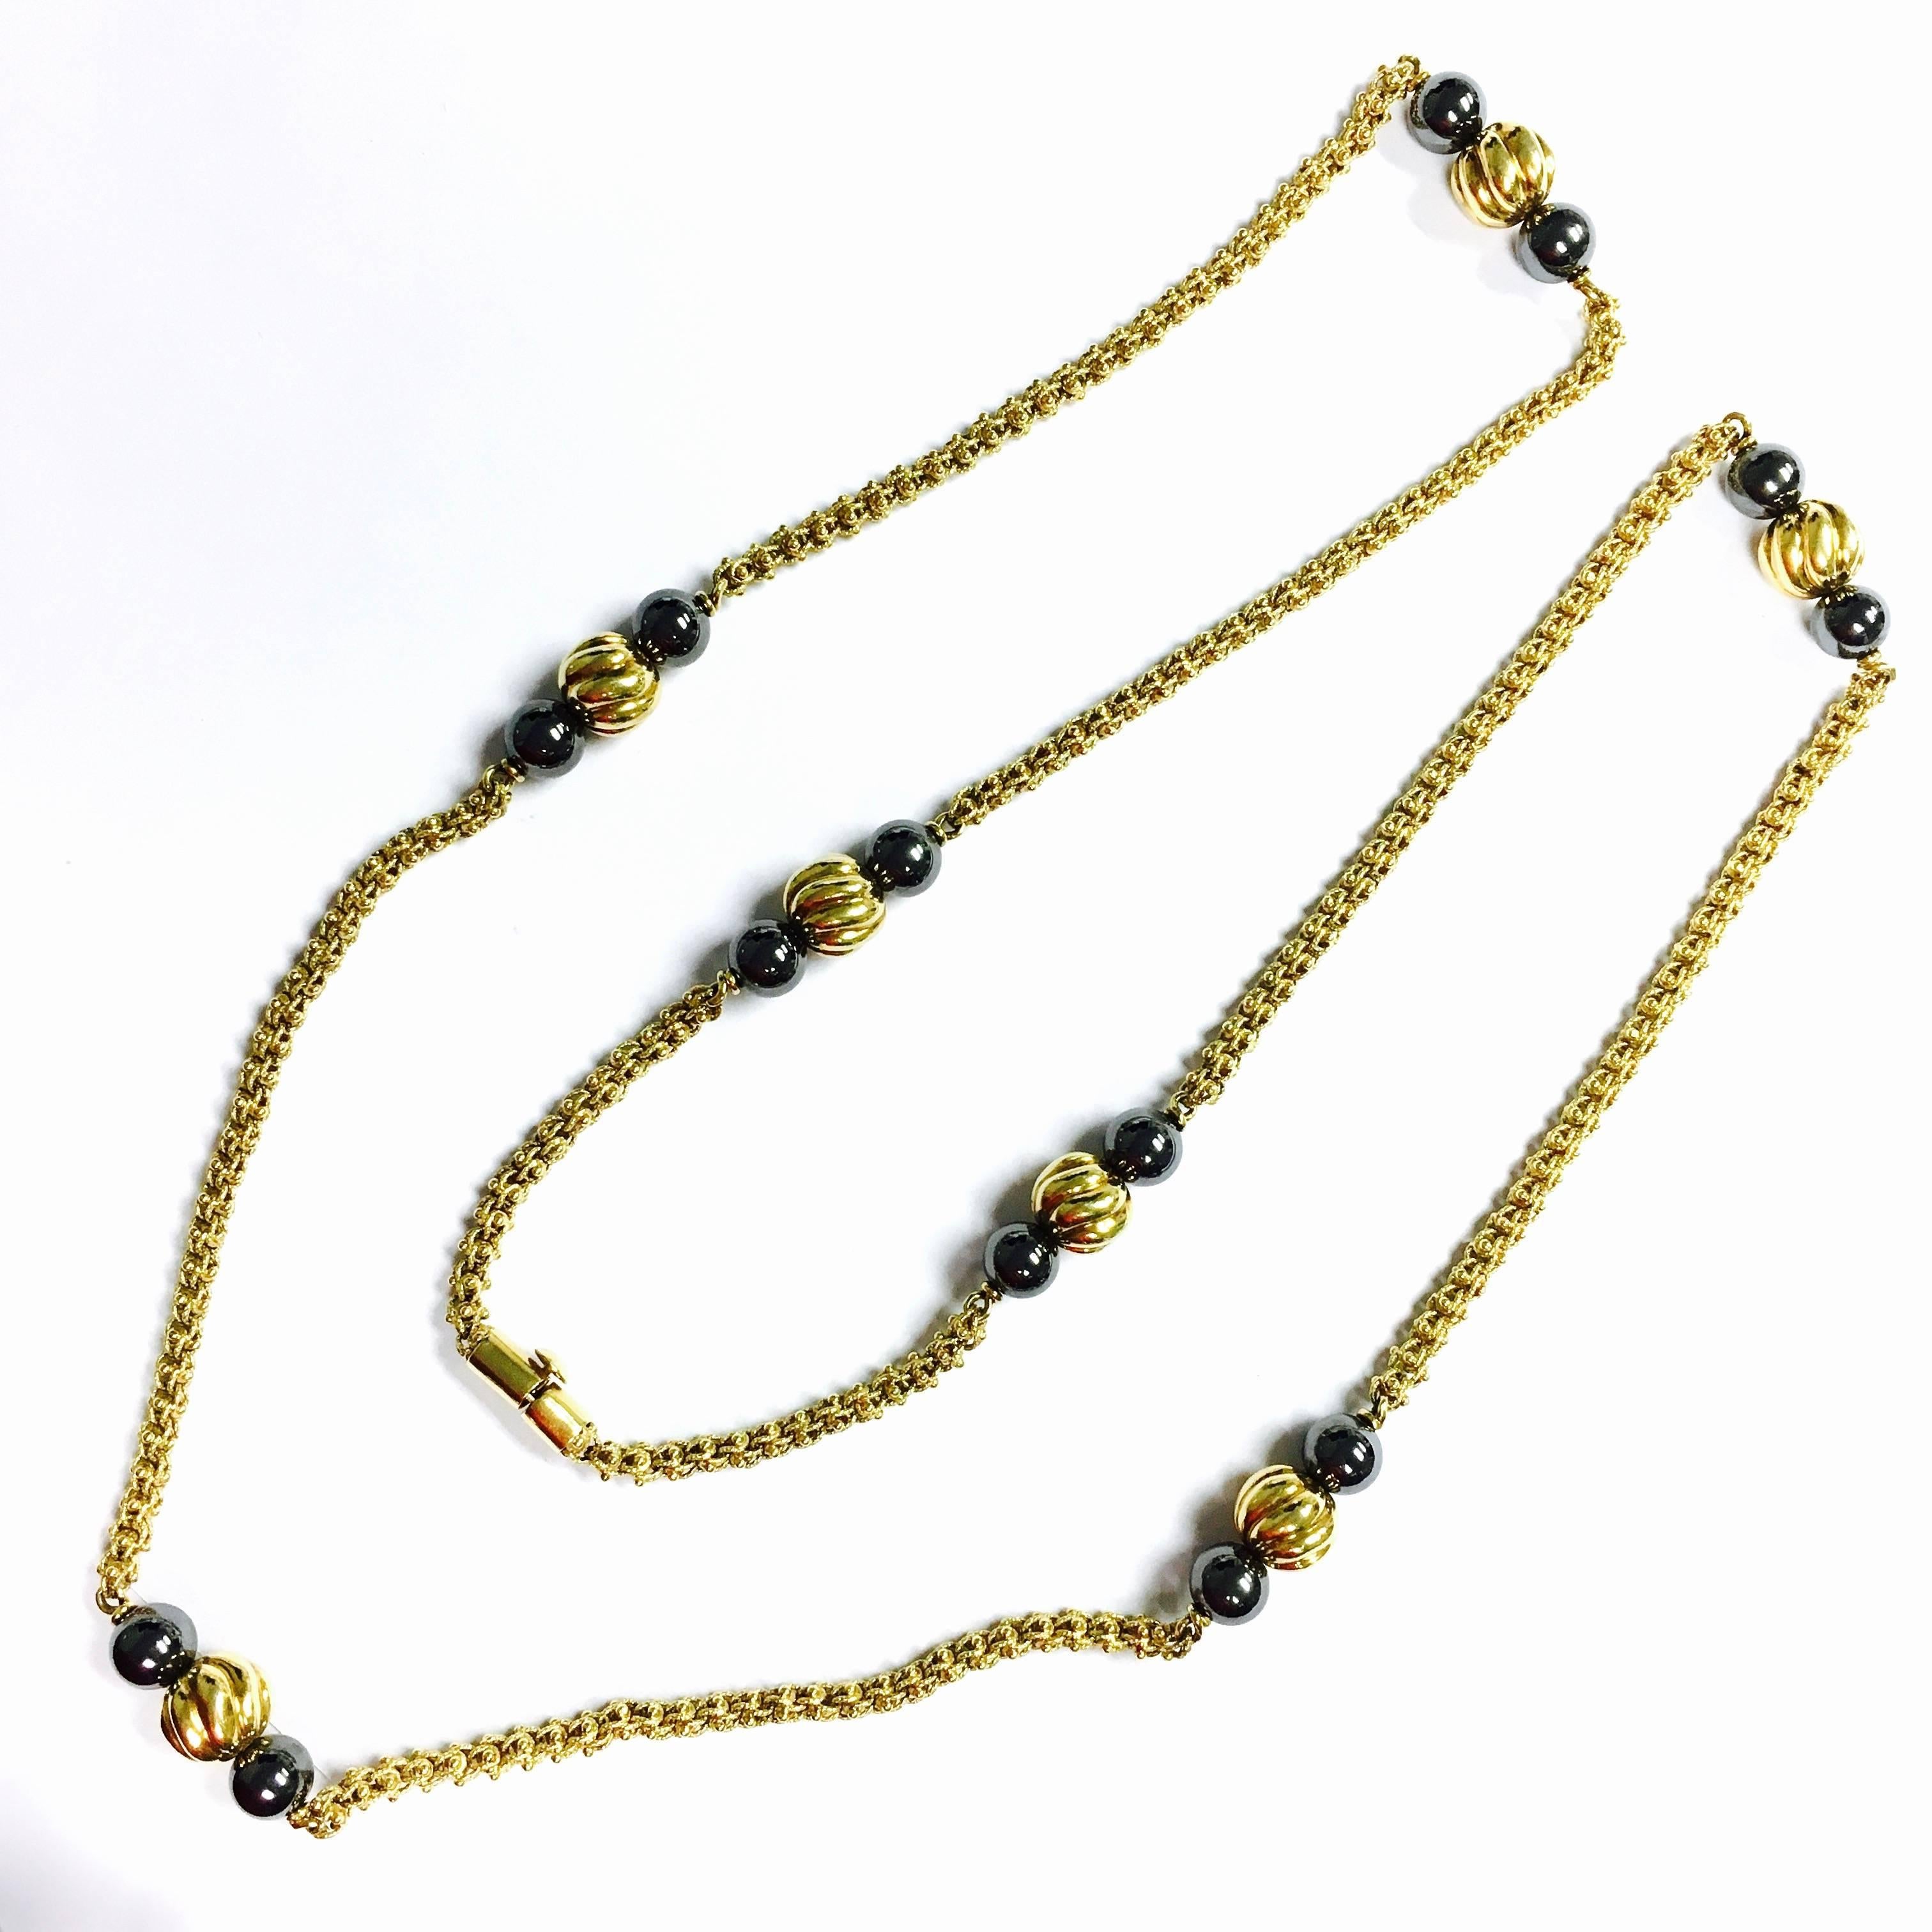 Crafted in 18K yellow gold, the chain features seven stations with two 8 mm hematite and on 10 mm gold beads.  35 inch long textured 4 mm wide chain.
Weight: 78.3 grams